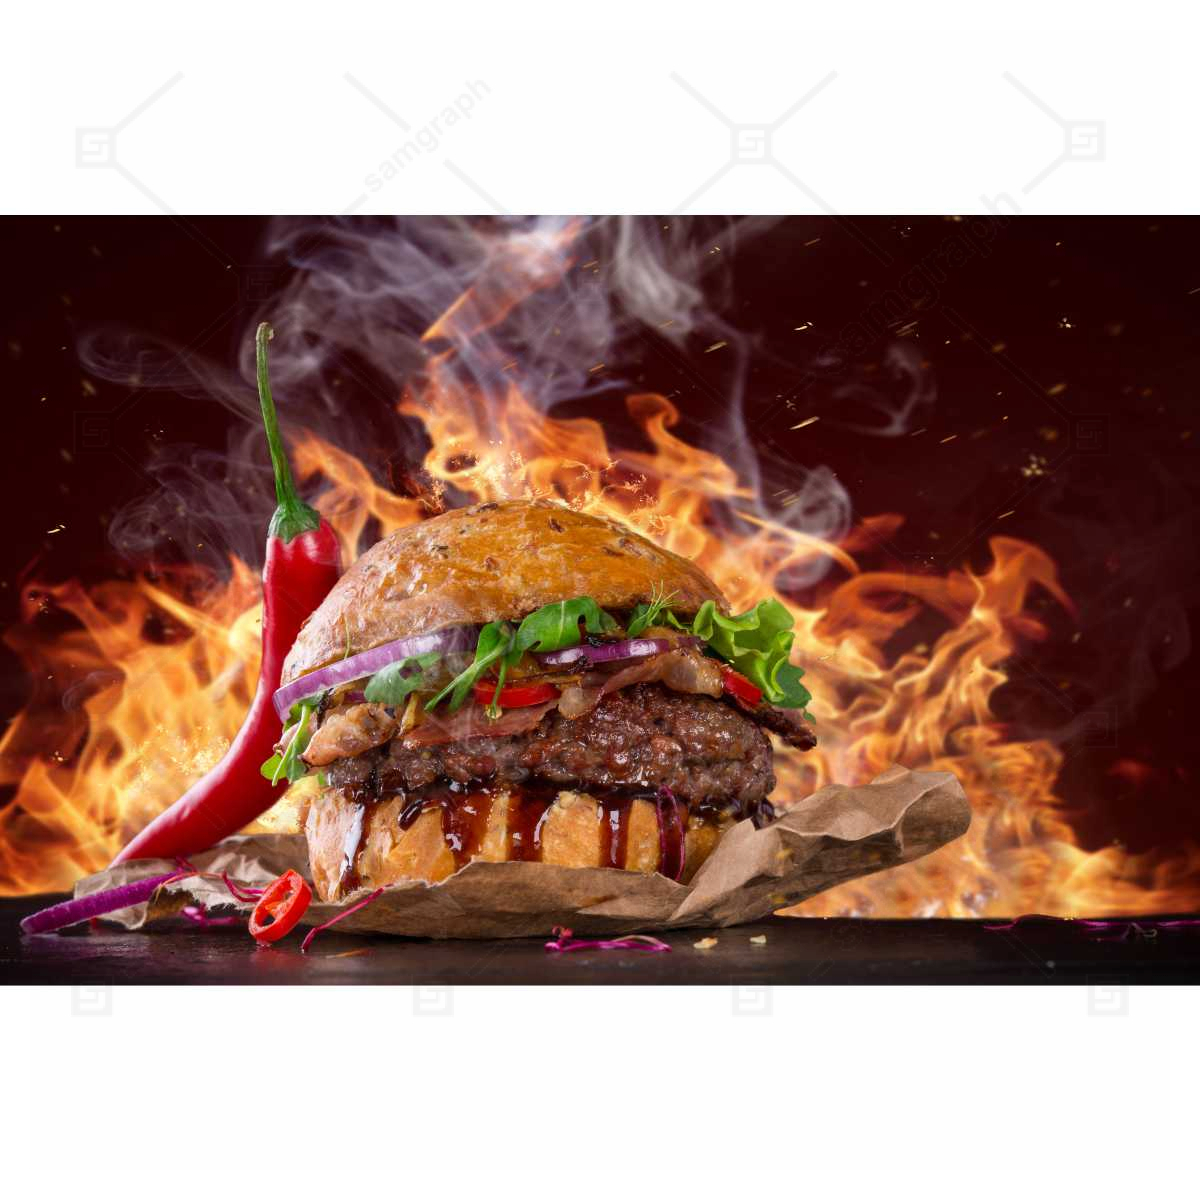 High quality photo of juicy hamburger with fire and pepper lettuce onion parsley 2 1